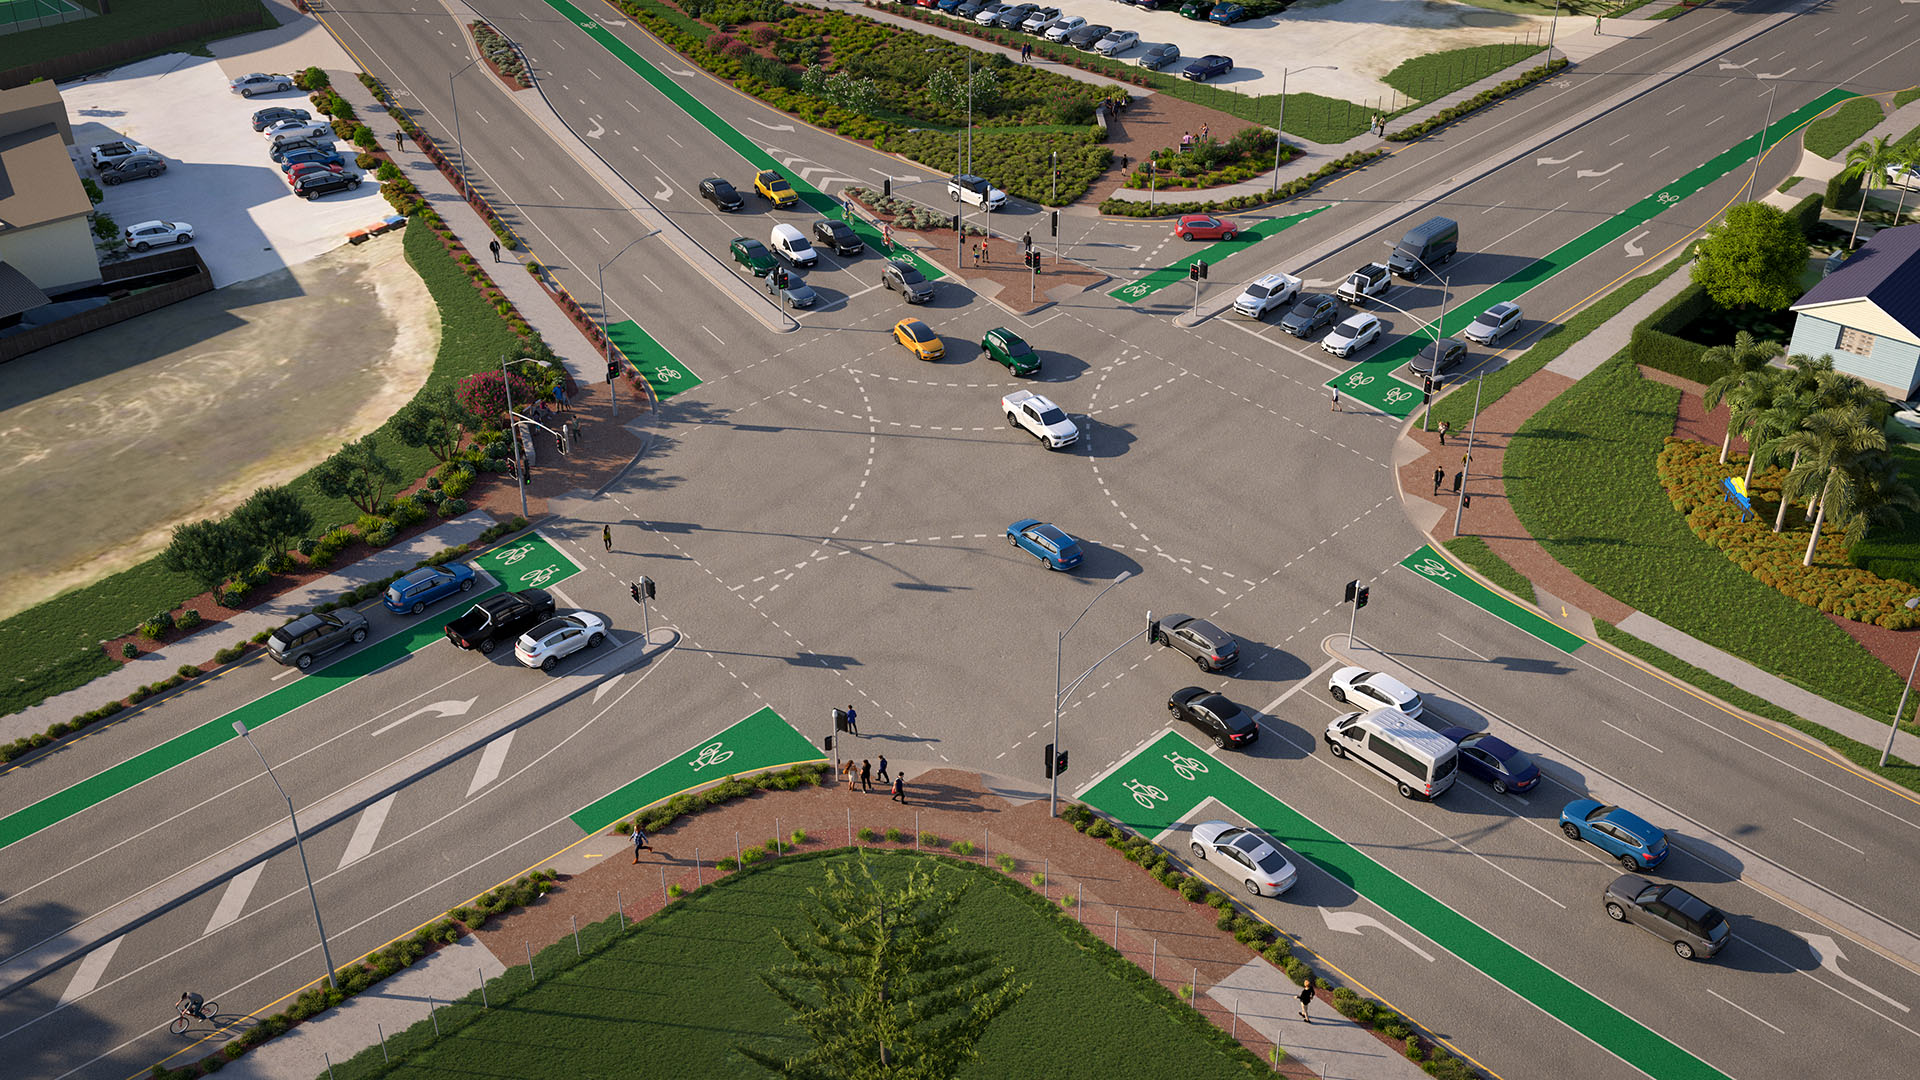 Artist impression elevated aerial view of intersection